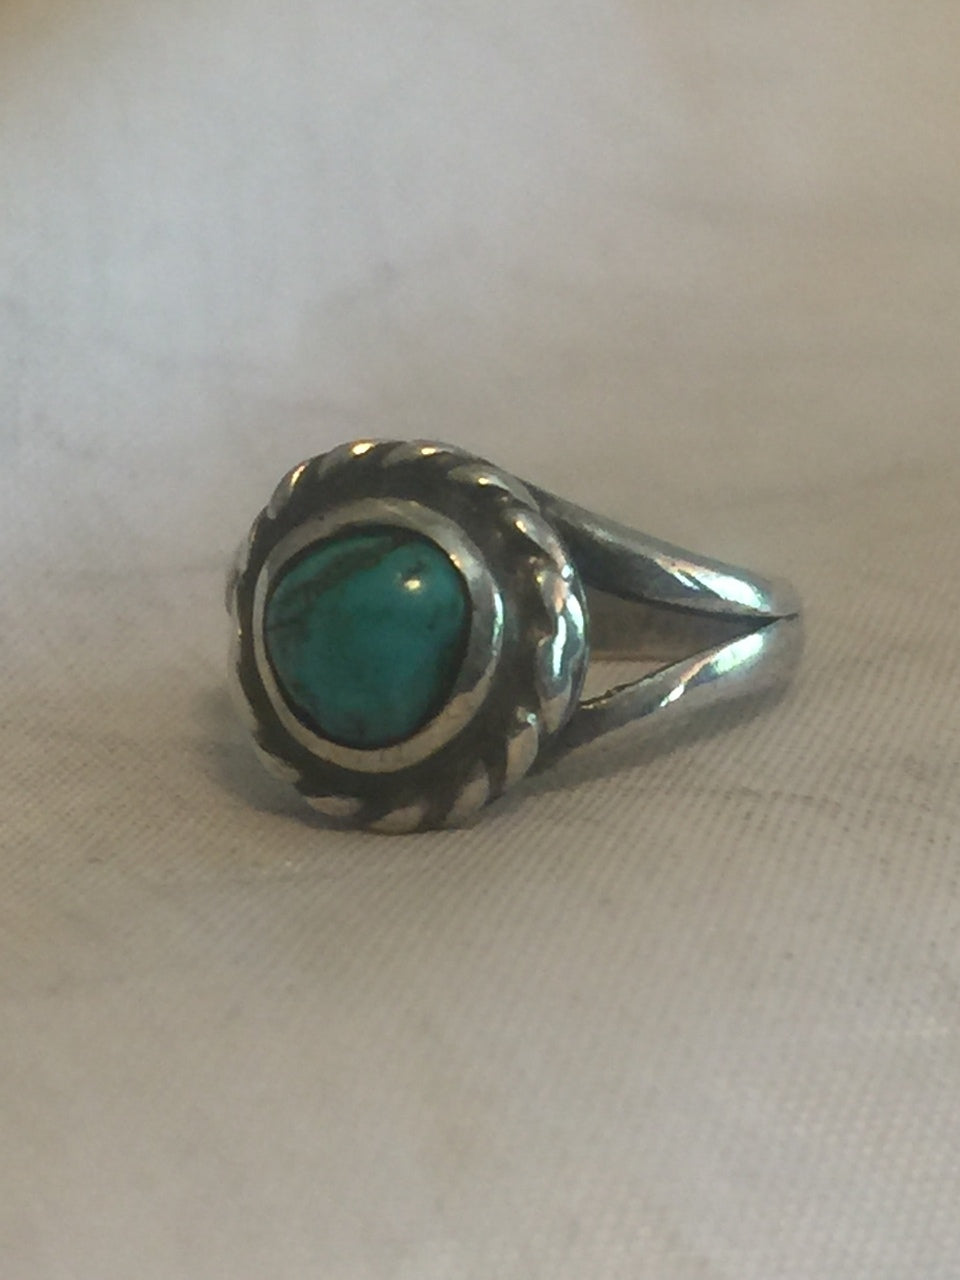 Vintage Sterling Silver Southwest Tribal Turquoise Ring Baby Size 1 2g